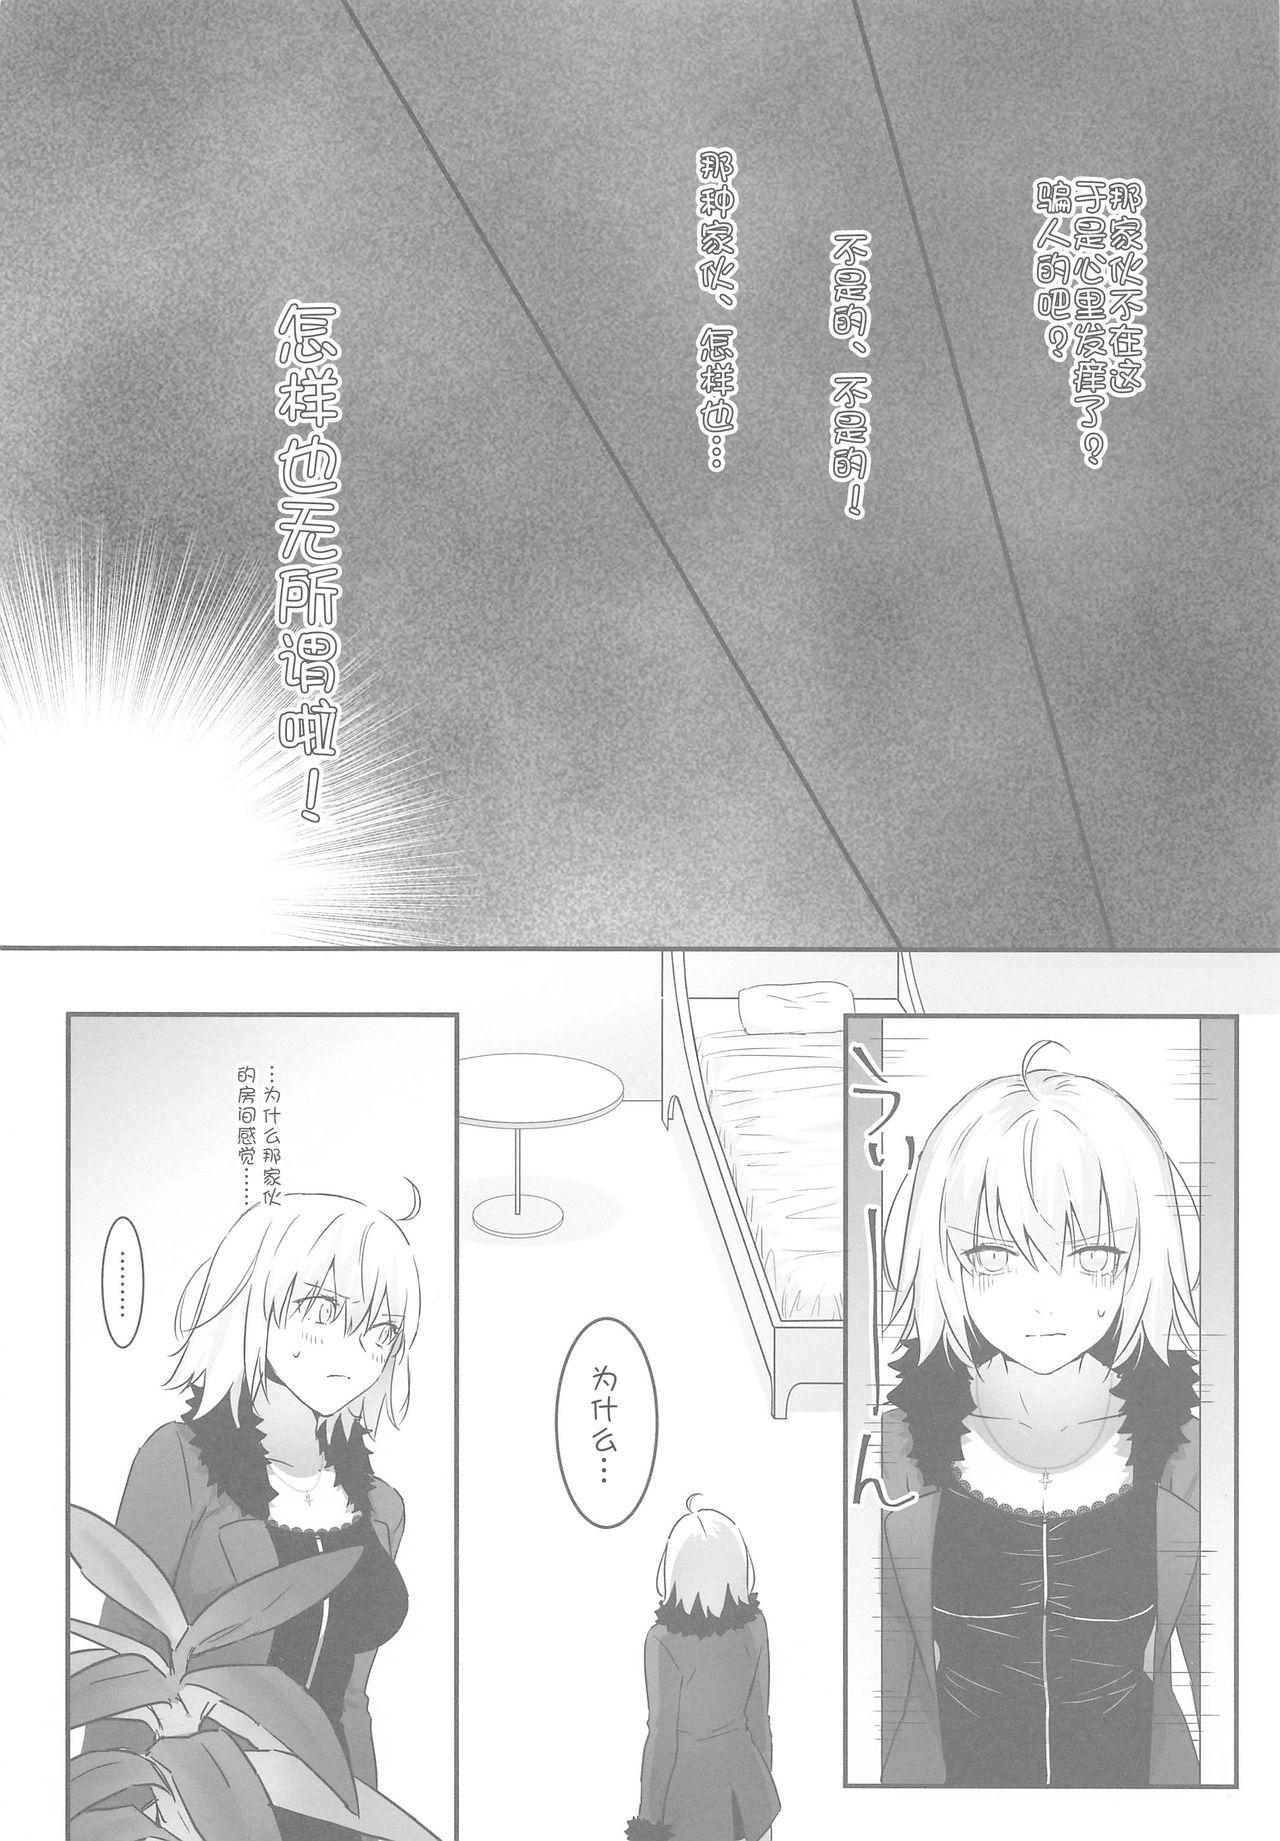 Rough Sex alter's secret. - Fate grand order Jerkoff - Page 10